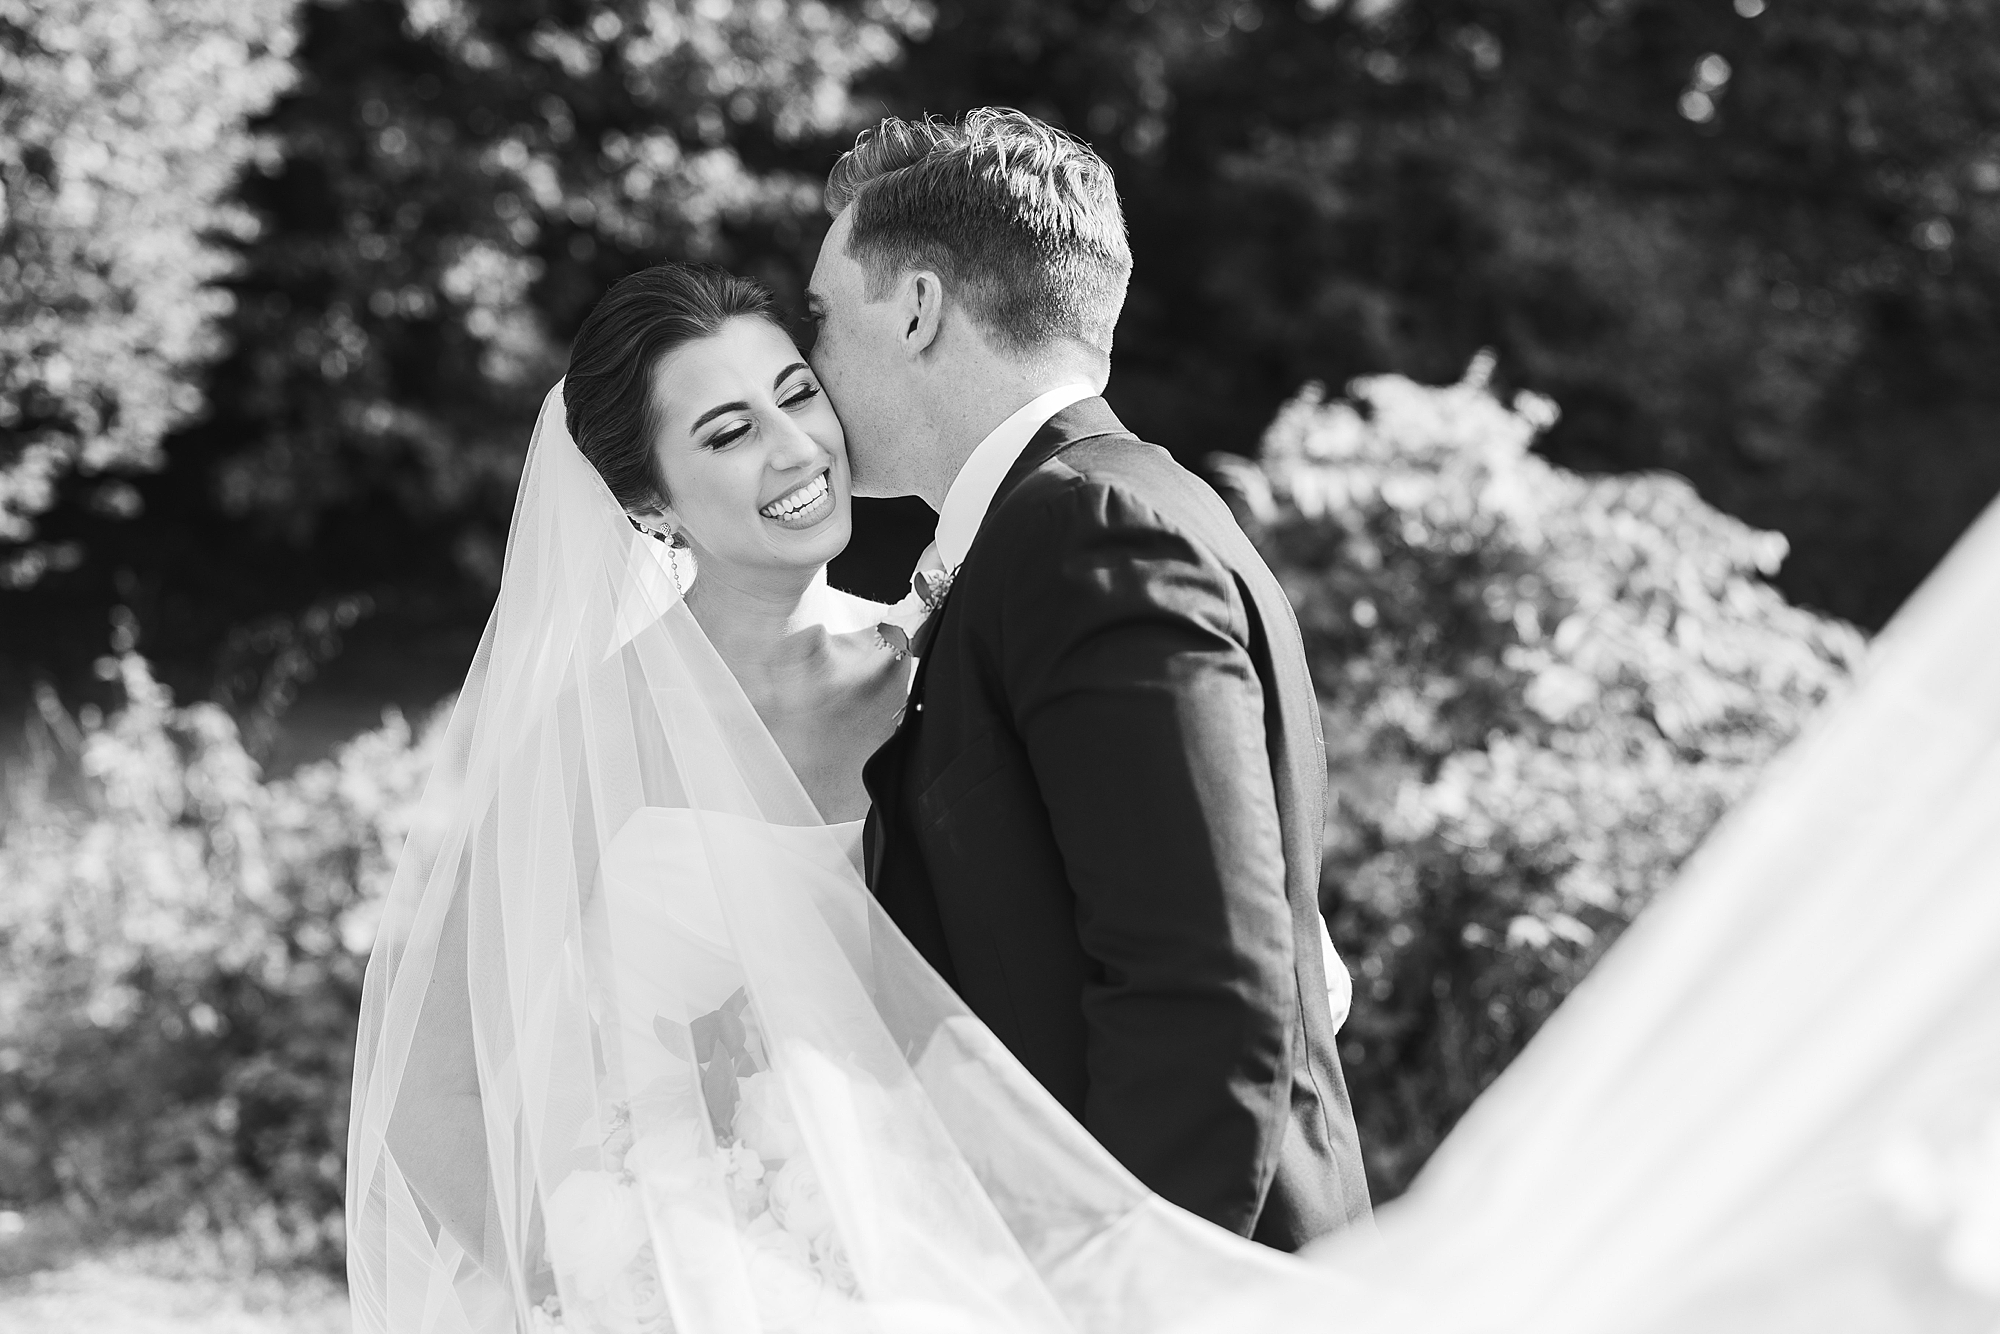 groom leans to kiss bride's cheek with veil floating behind them